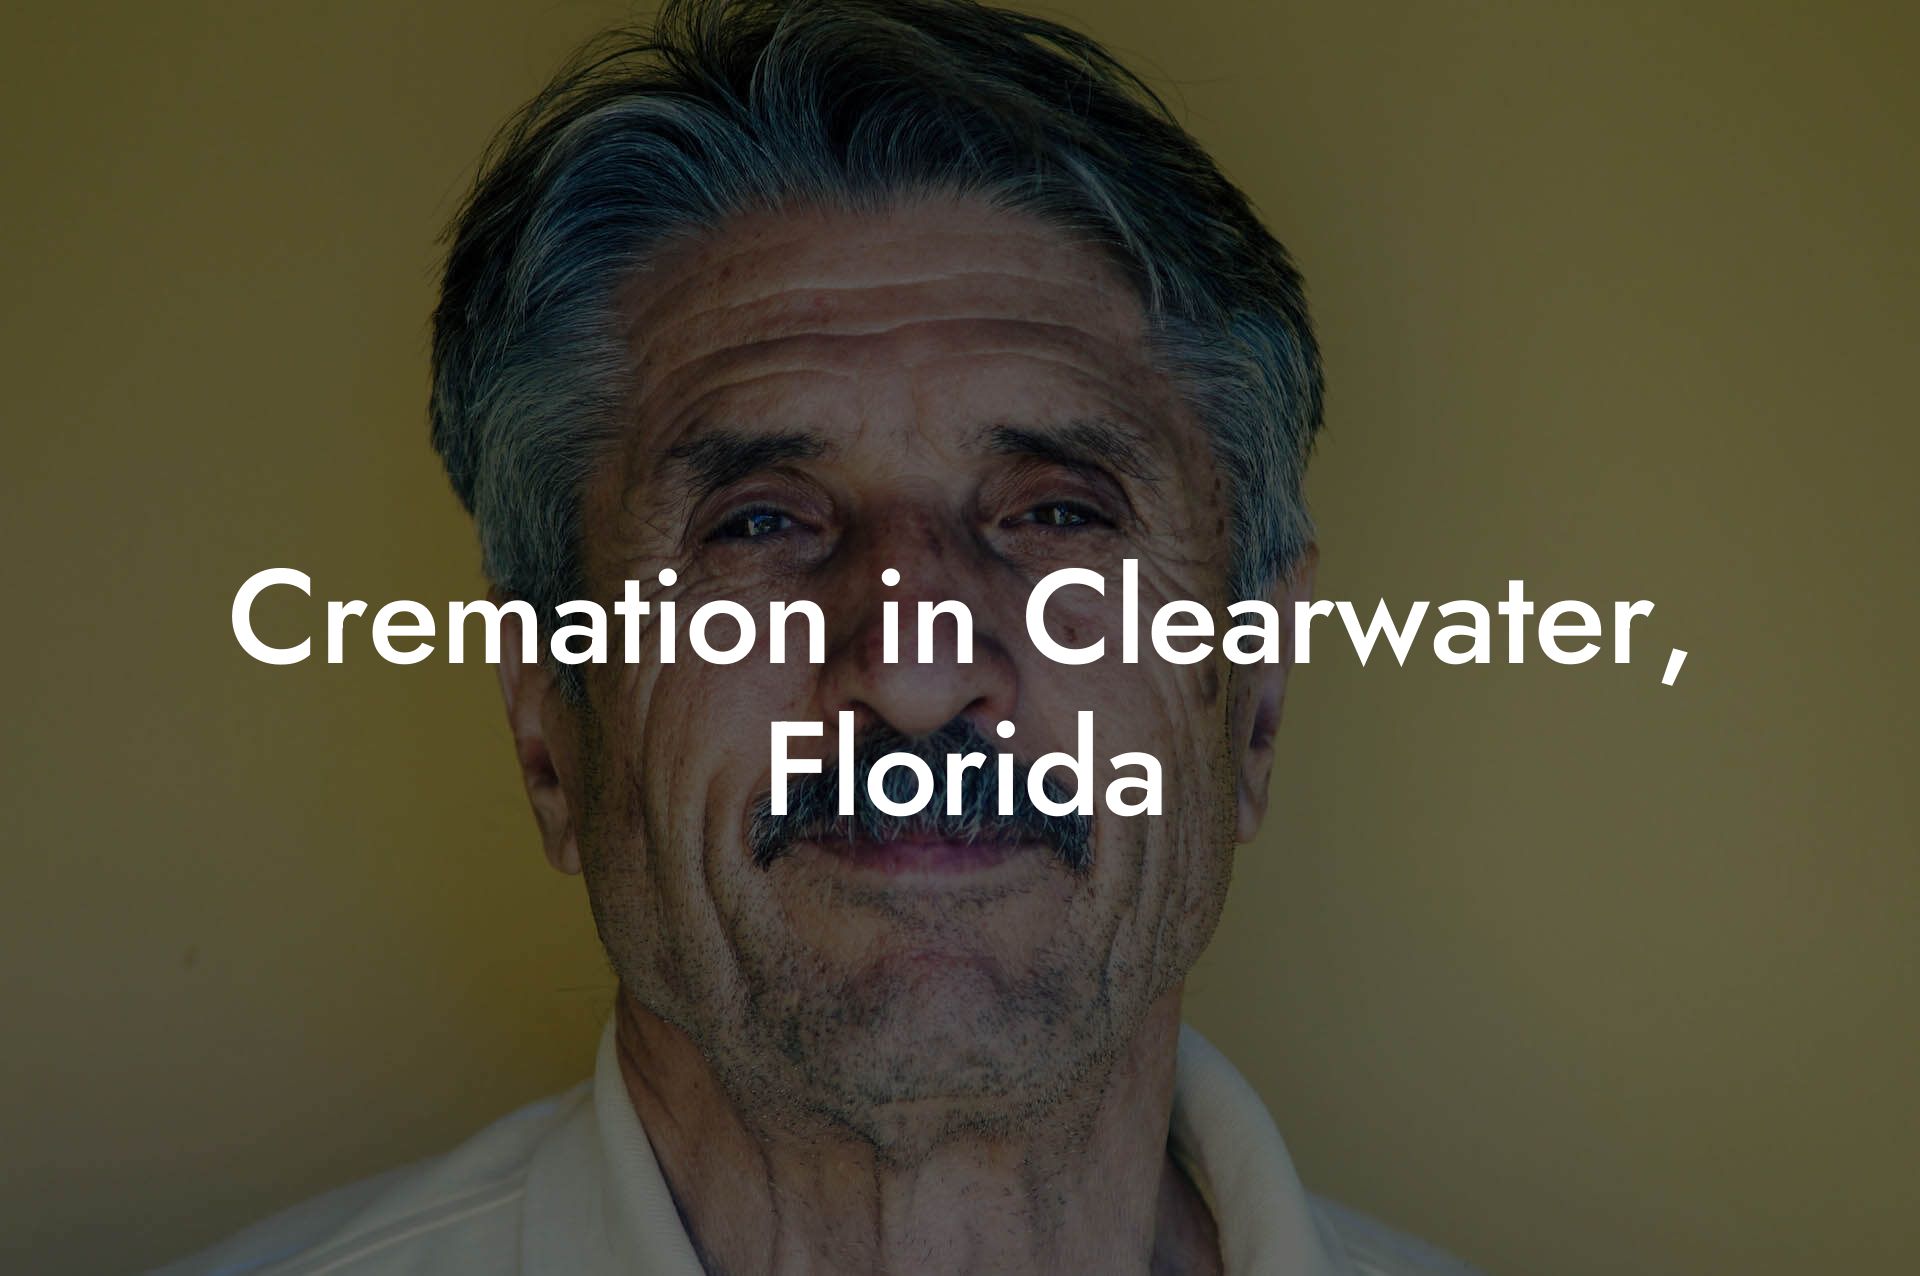 Cremation in Clearwater, Florida